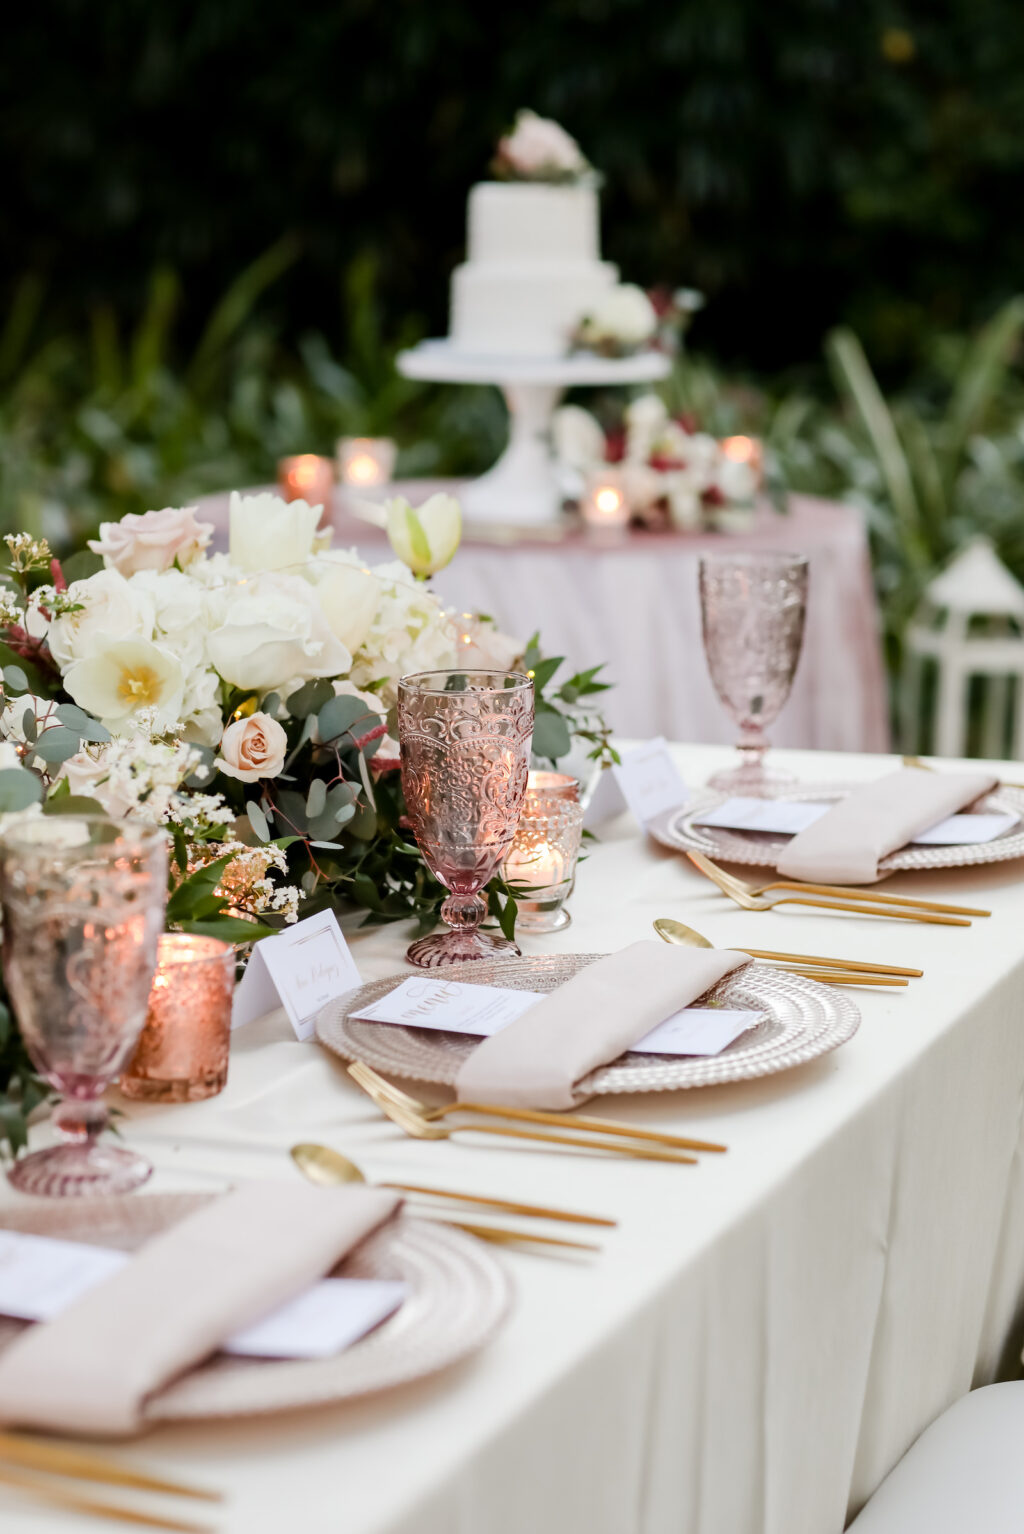 Romantic Pink Wedding Reception Decor, Long Table with Ivory Linen, Gold Silverware, Vintage Pink Glassware, White Hydrangeas, Greenery Eucalyptus, and Pink Floral Garland | Tampa Bay Wedding Photographer Lifelong Photography Studio | Wedding Planner Special Moments Event Planning | Wedding Rentals Kate Ryan Event Rentals |